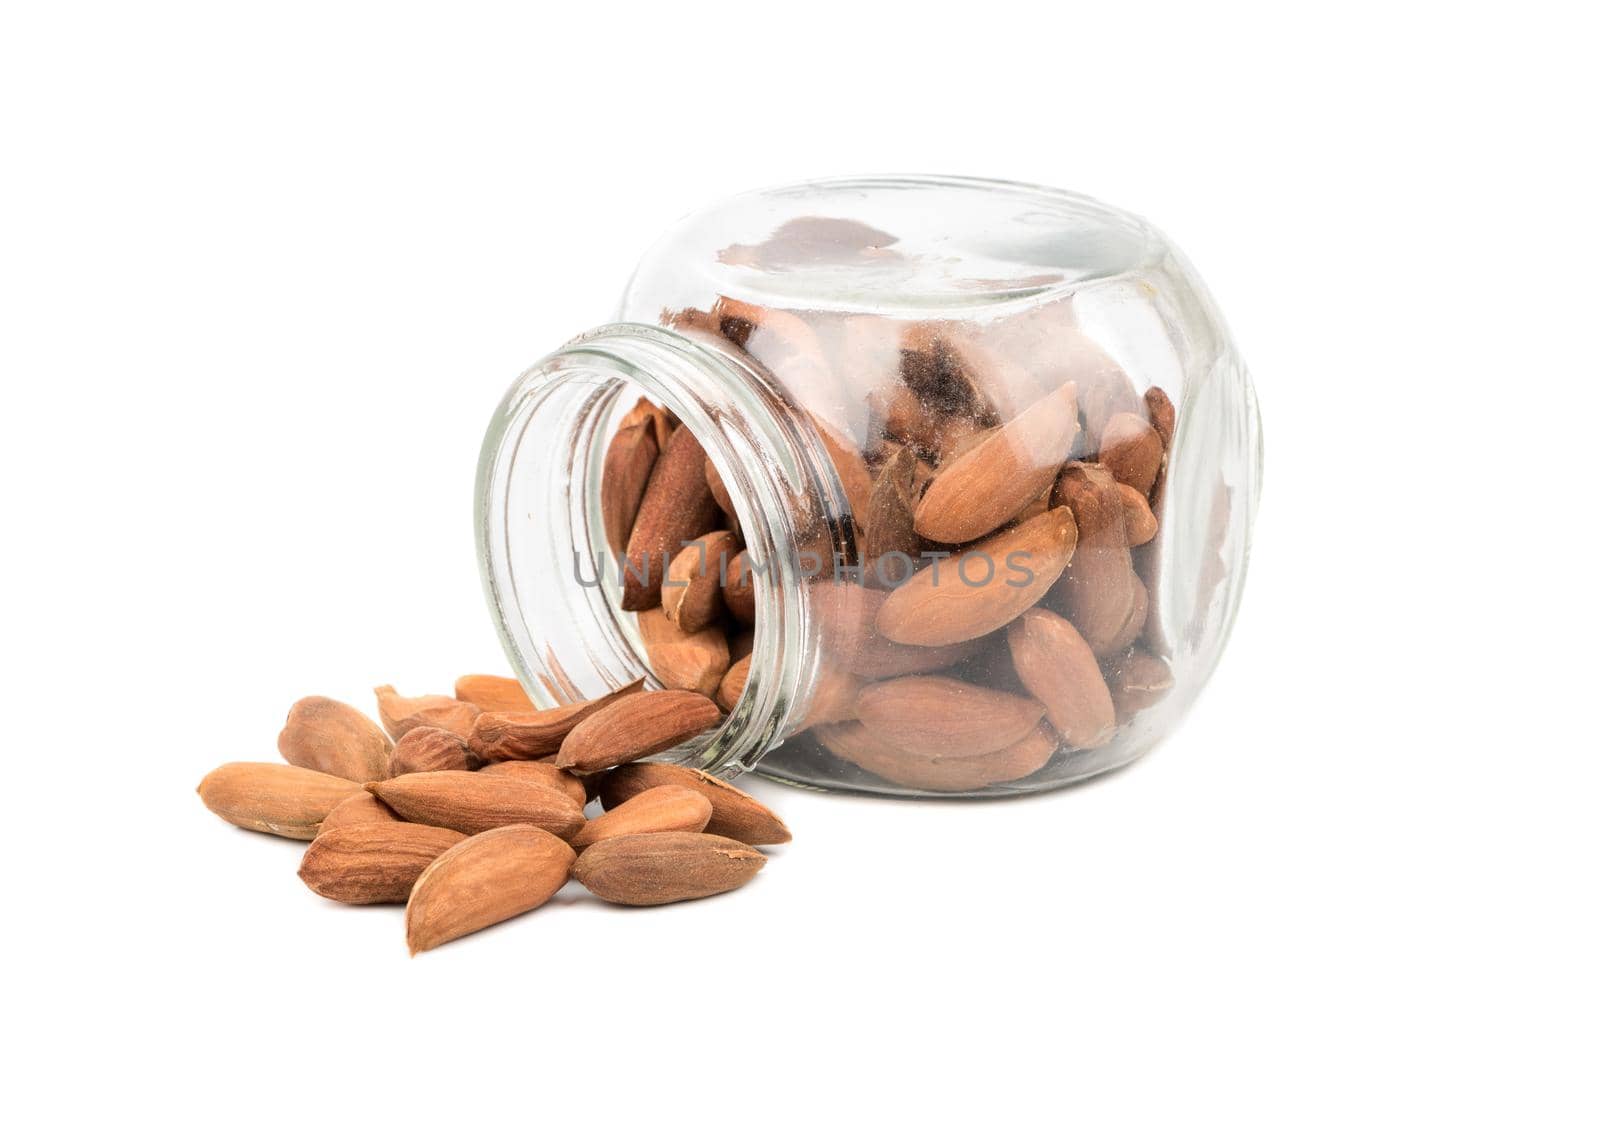 Scattered Uzbek almonds from a glass jar on a white background